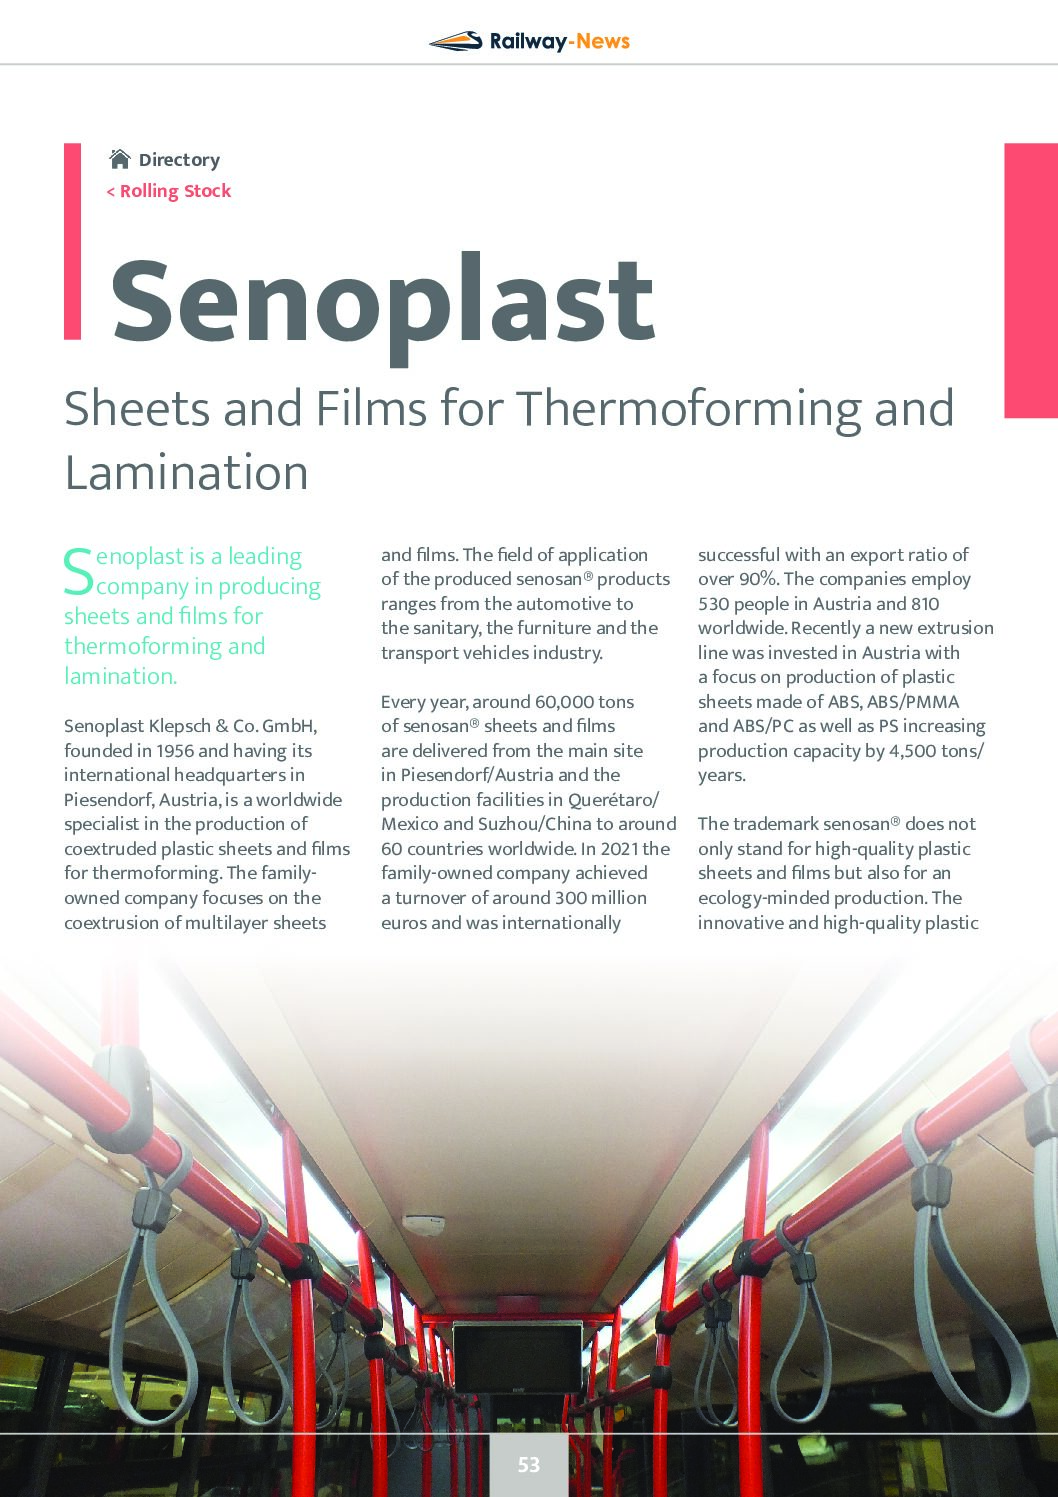 Sheets and Films for Thermoforming and Lamination